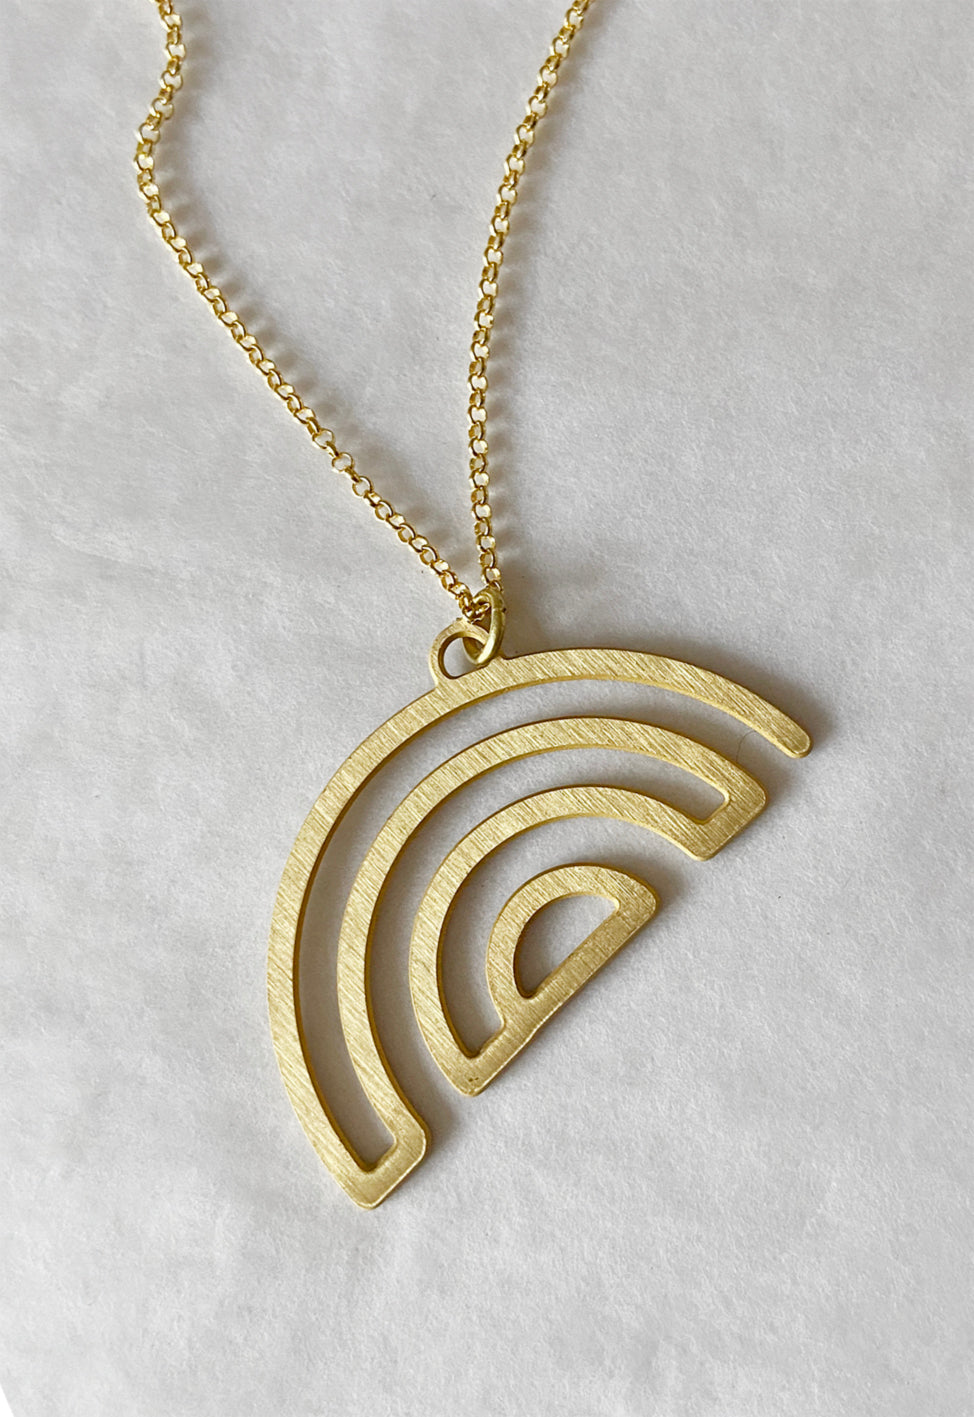 Arco necklace